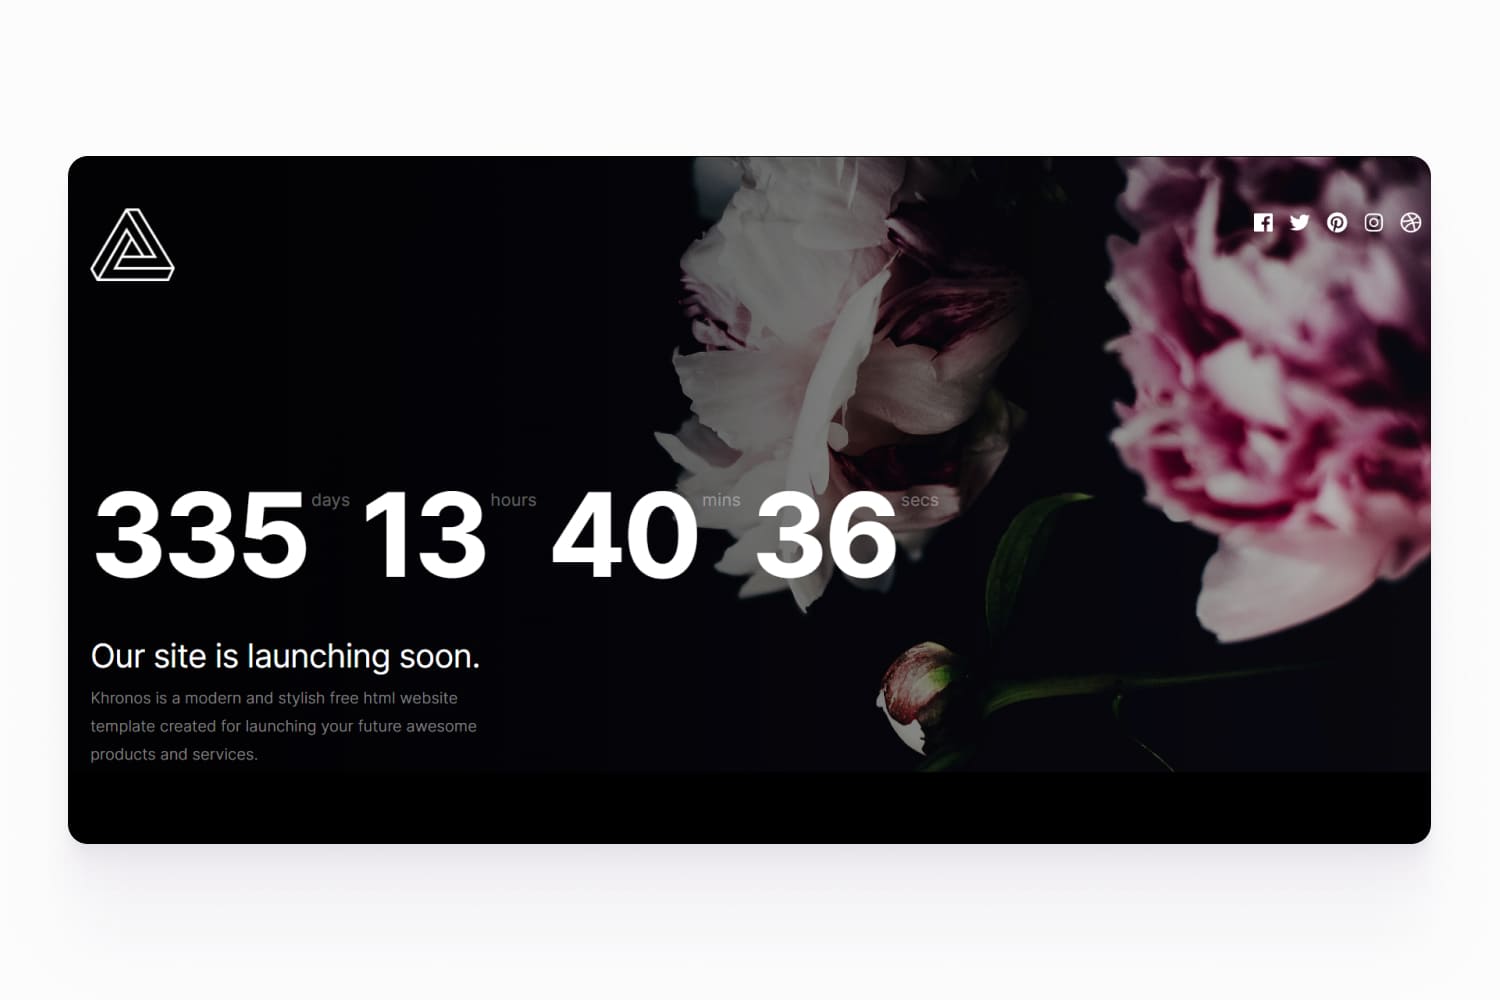 Website page screenshot with countdown to launch and photo of roses on black background.